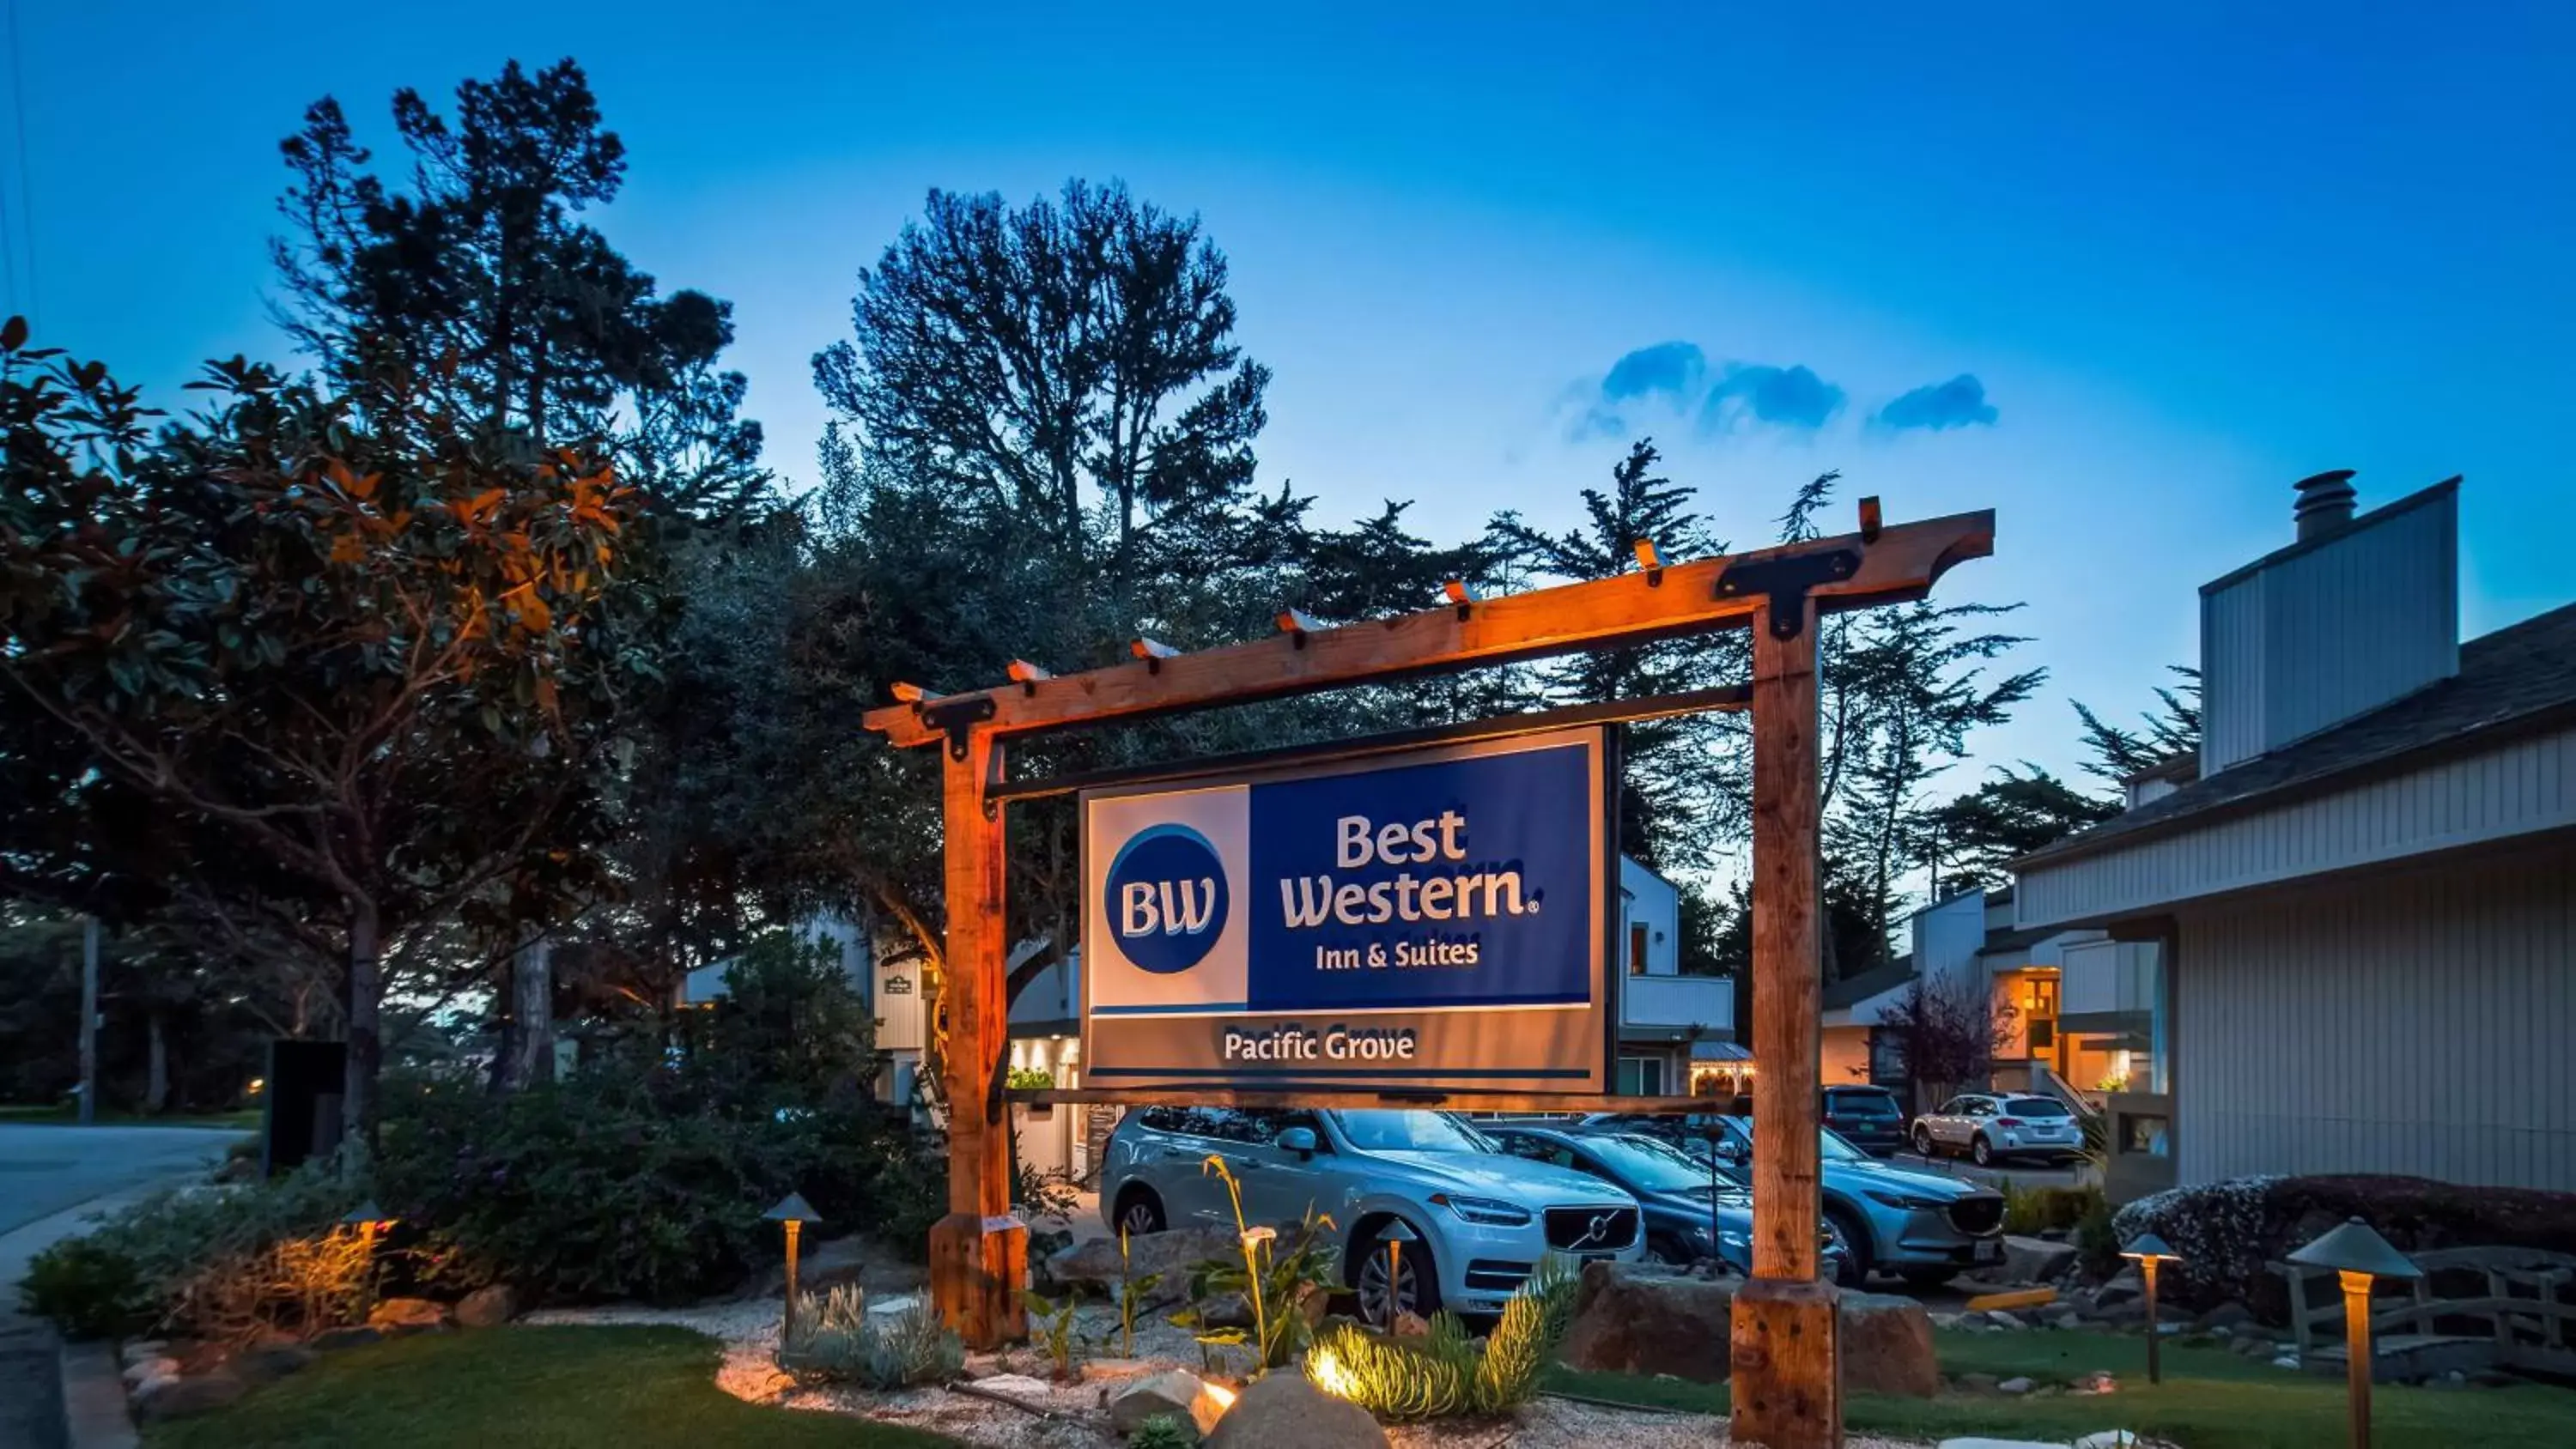 Property building in Best Western The Inn & Suites Pacific Grove